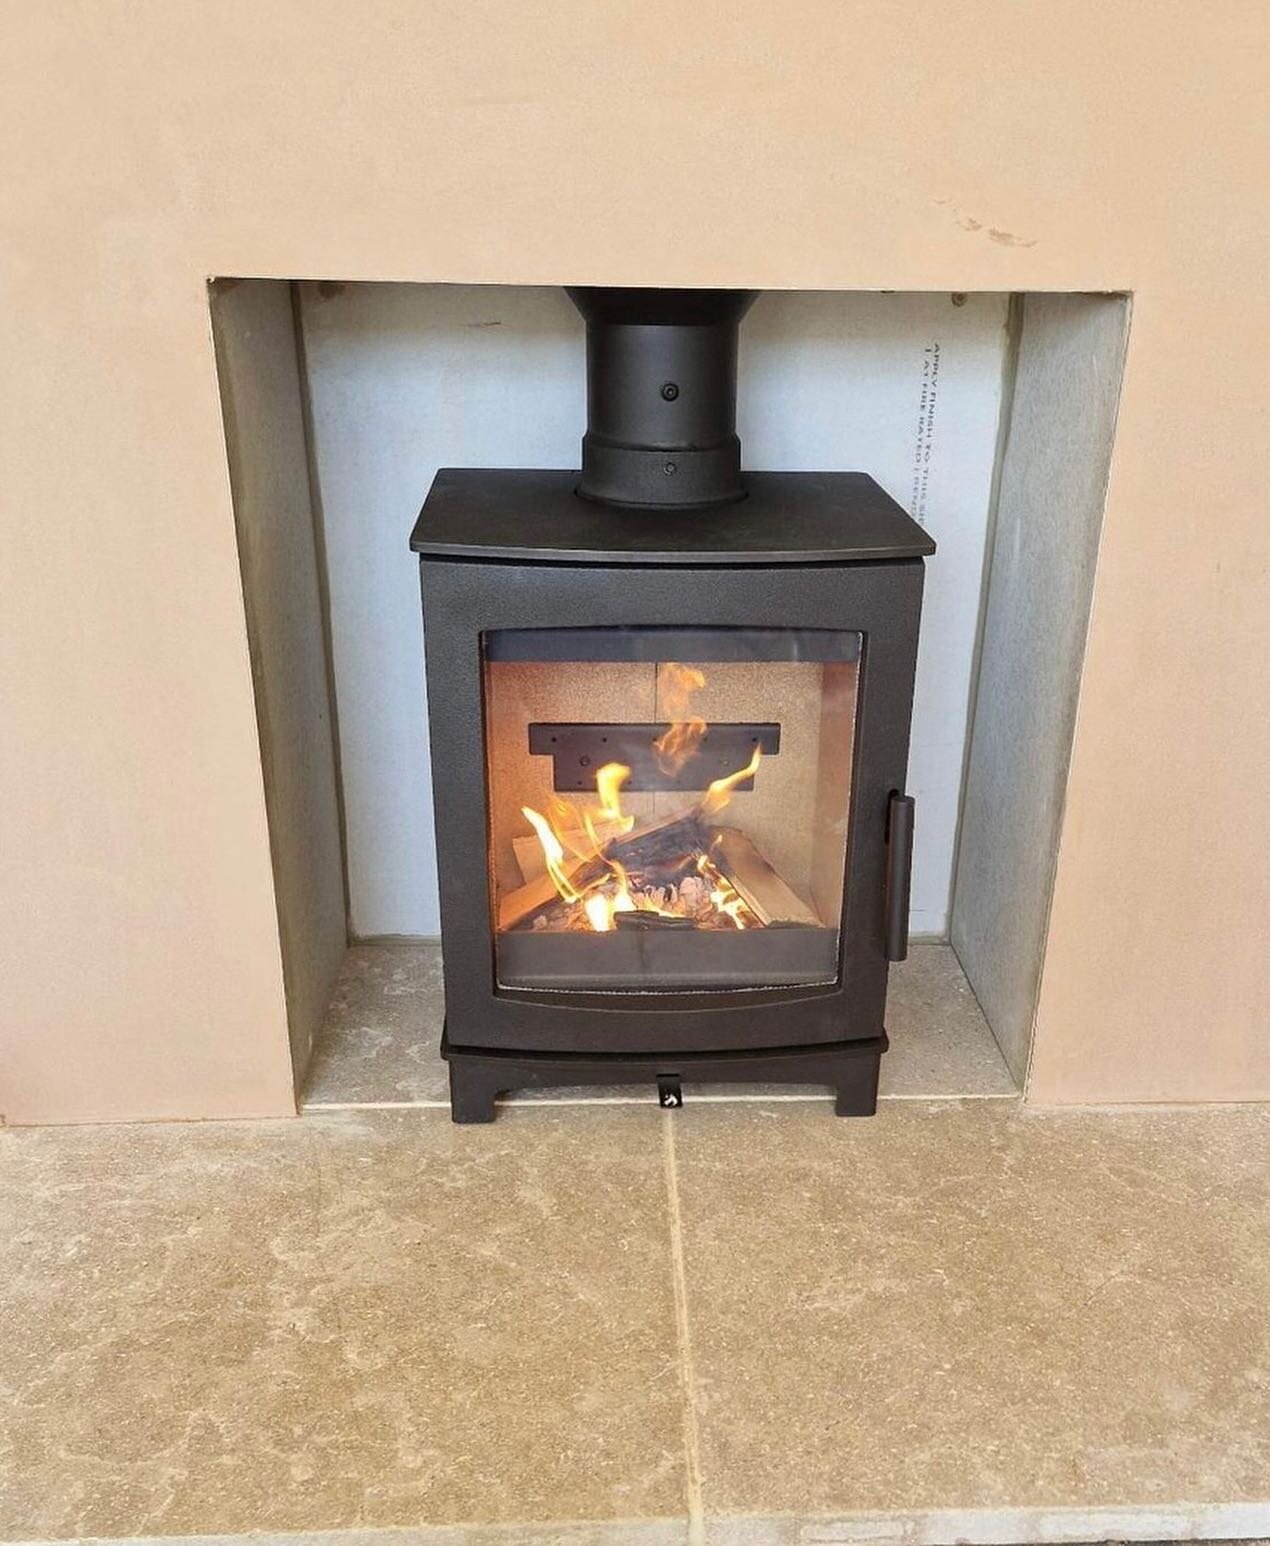 Our customers are getting ahead of the game by doing the prep now. 

September onwards is always busy with wood burners so we suggest booking early if you looking to be ready for next winter. 
#hereford #herefordshirelife #herefordcity #herefordbusin